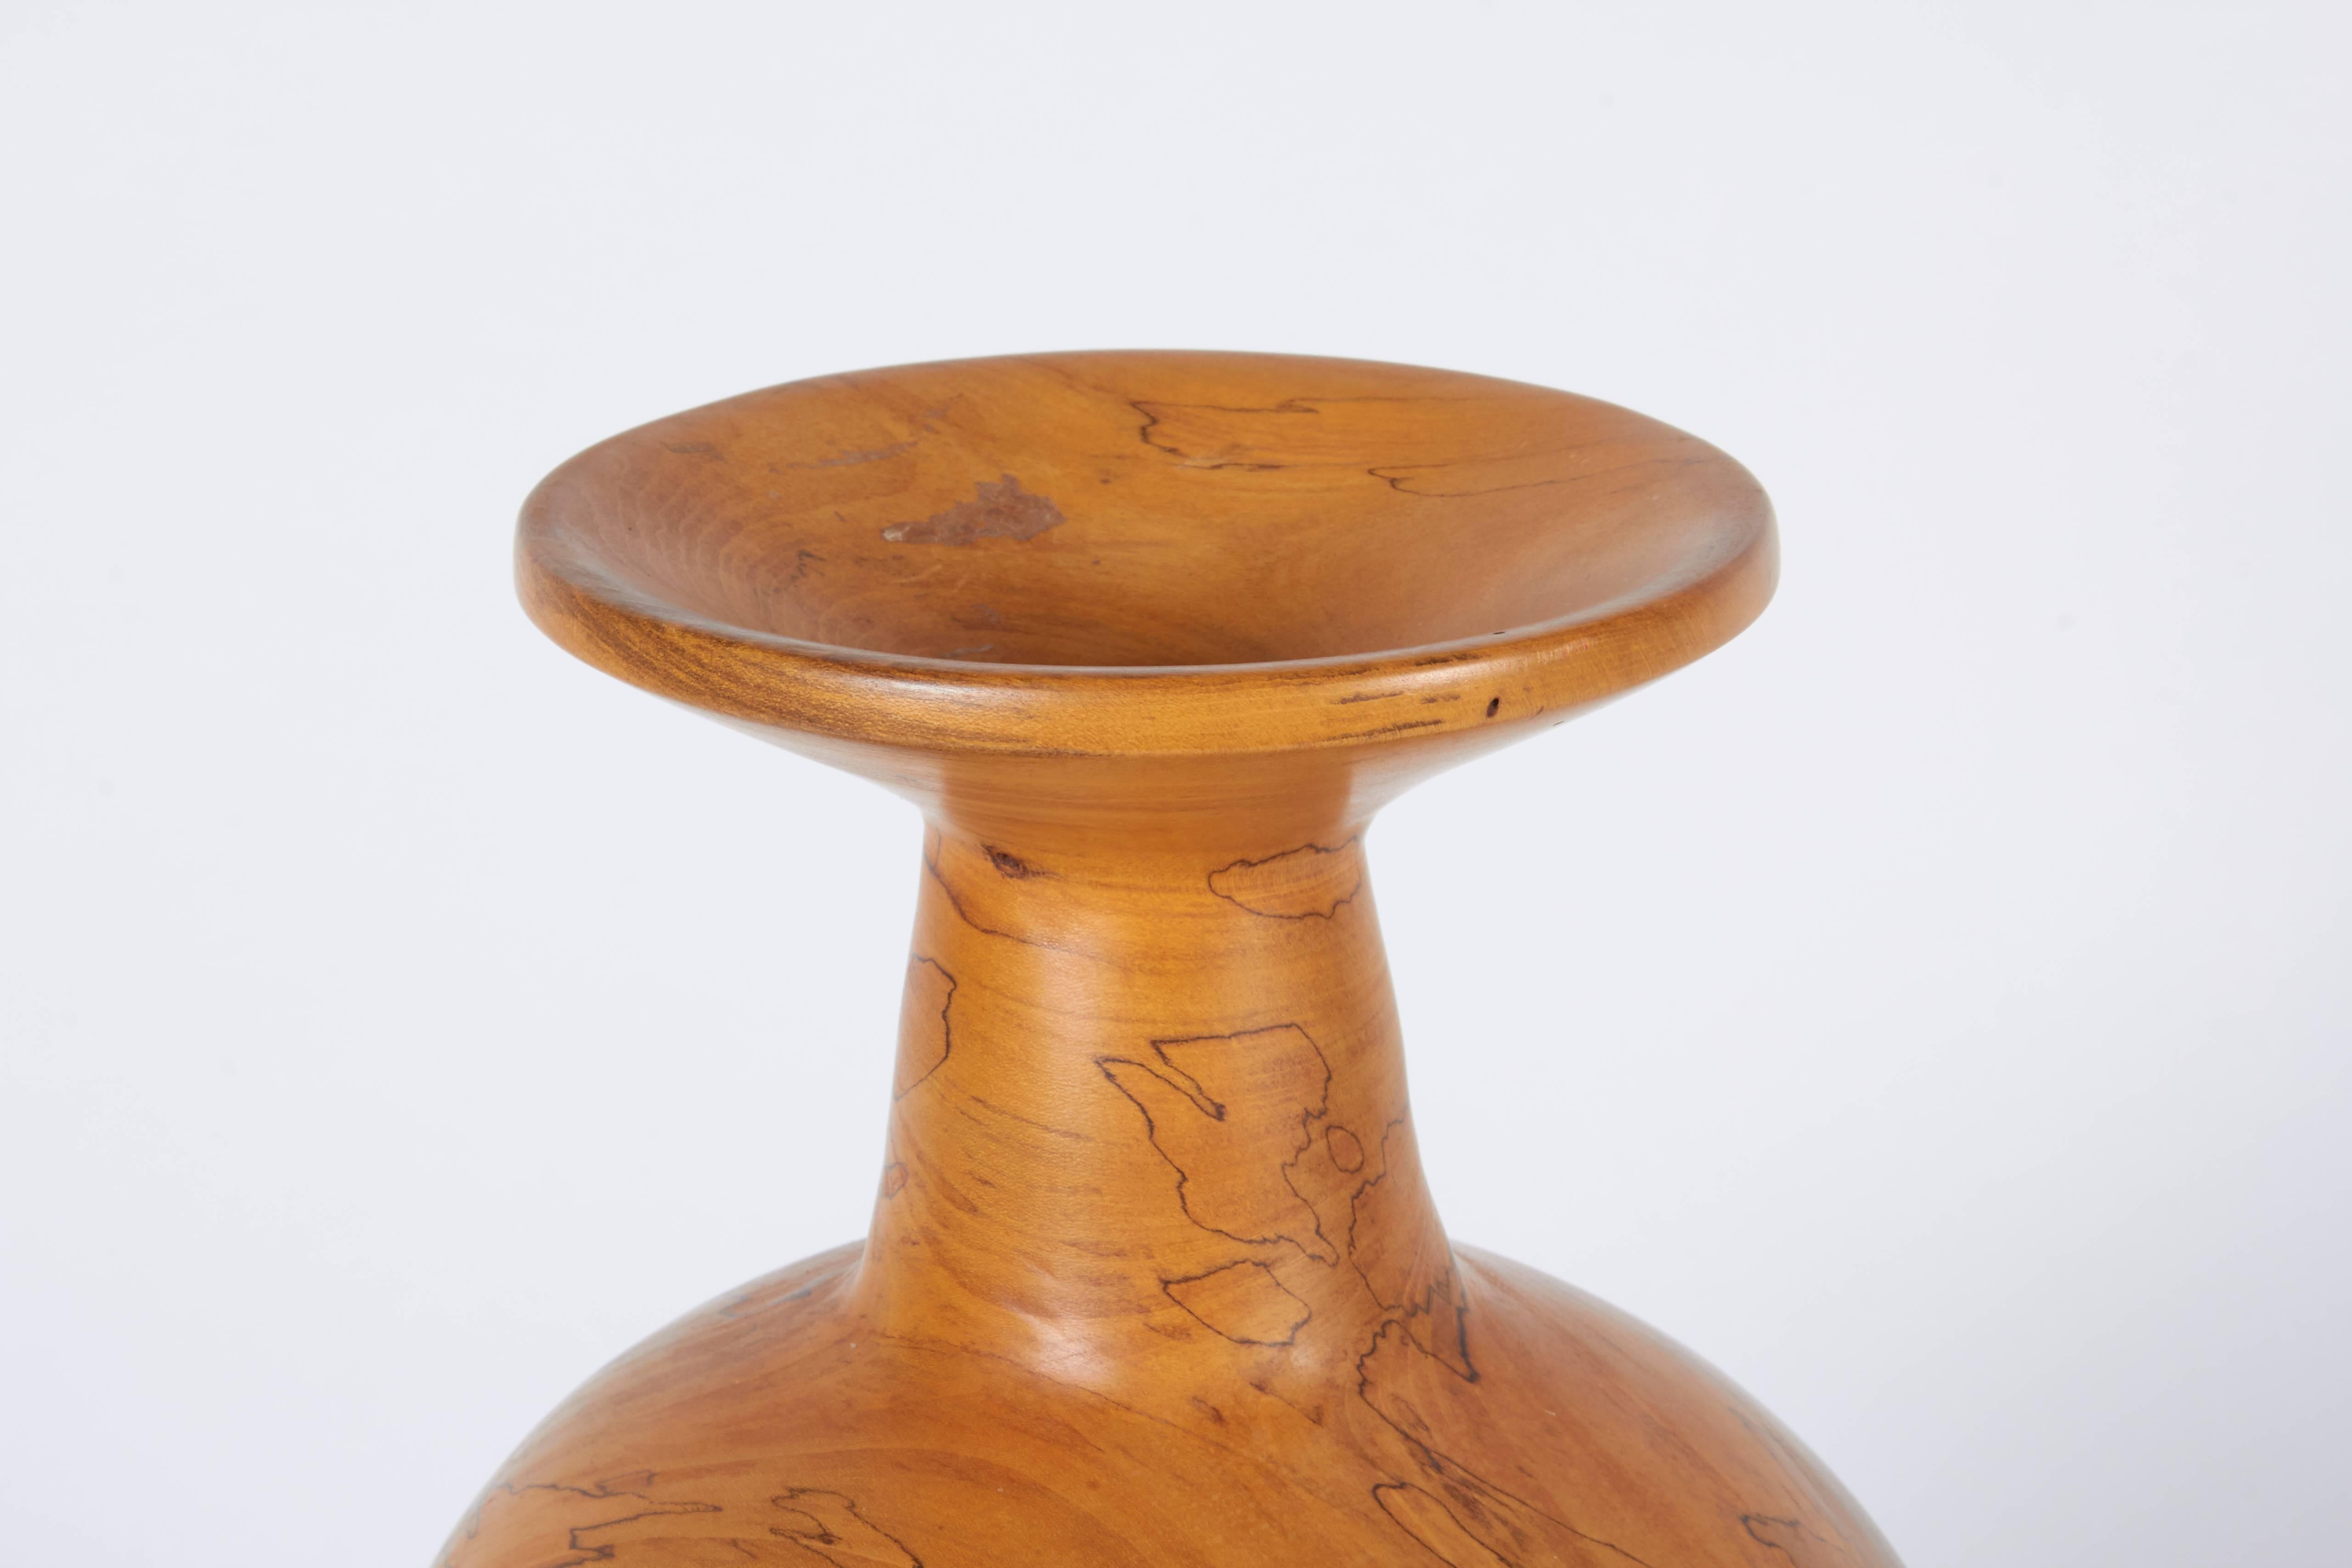 Late 20th Century Melvin Lindquist Spalted Magnolia Turned Vase, Signed & Dated 1986